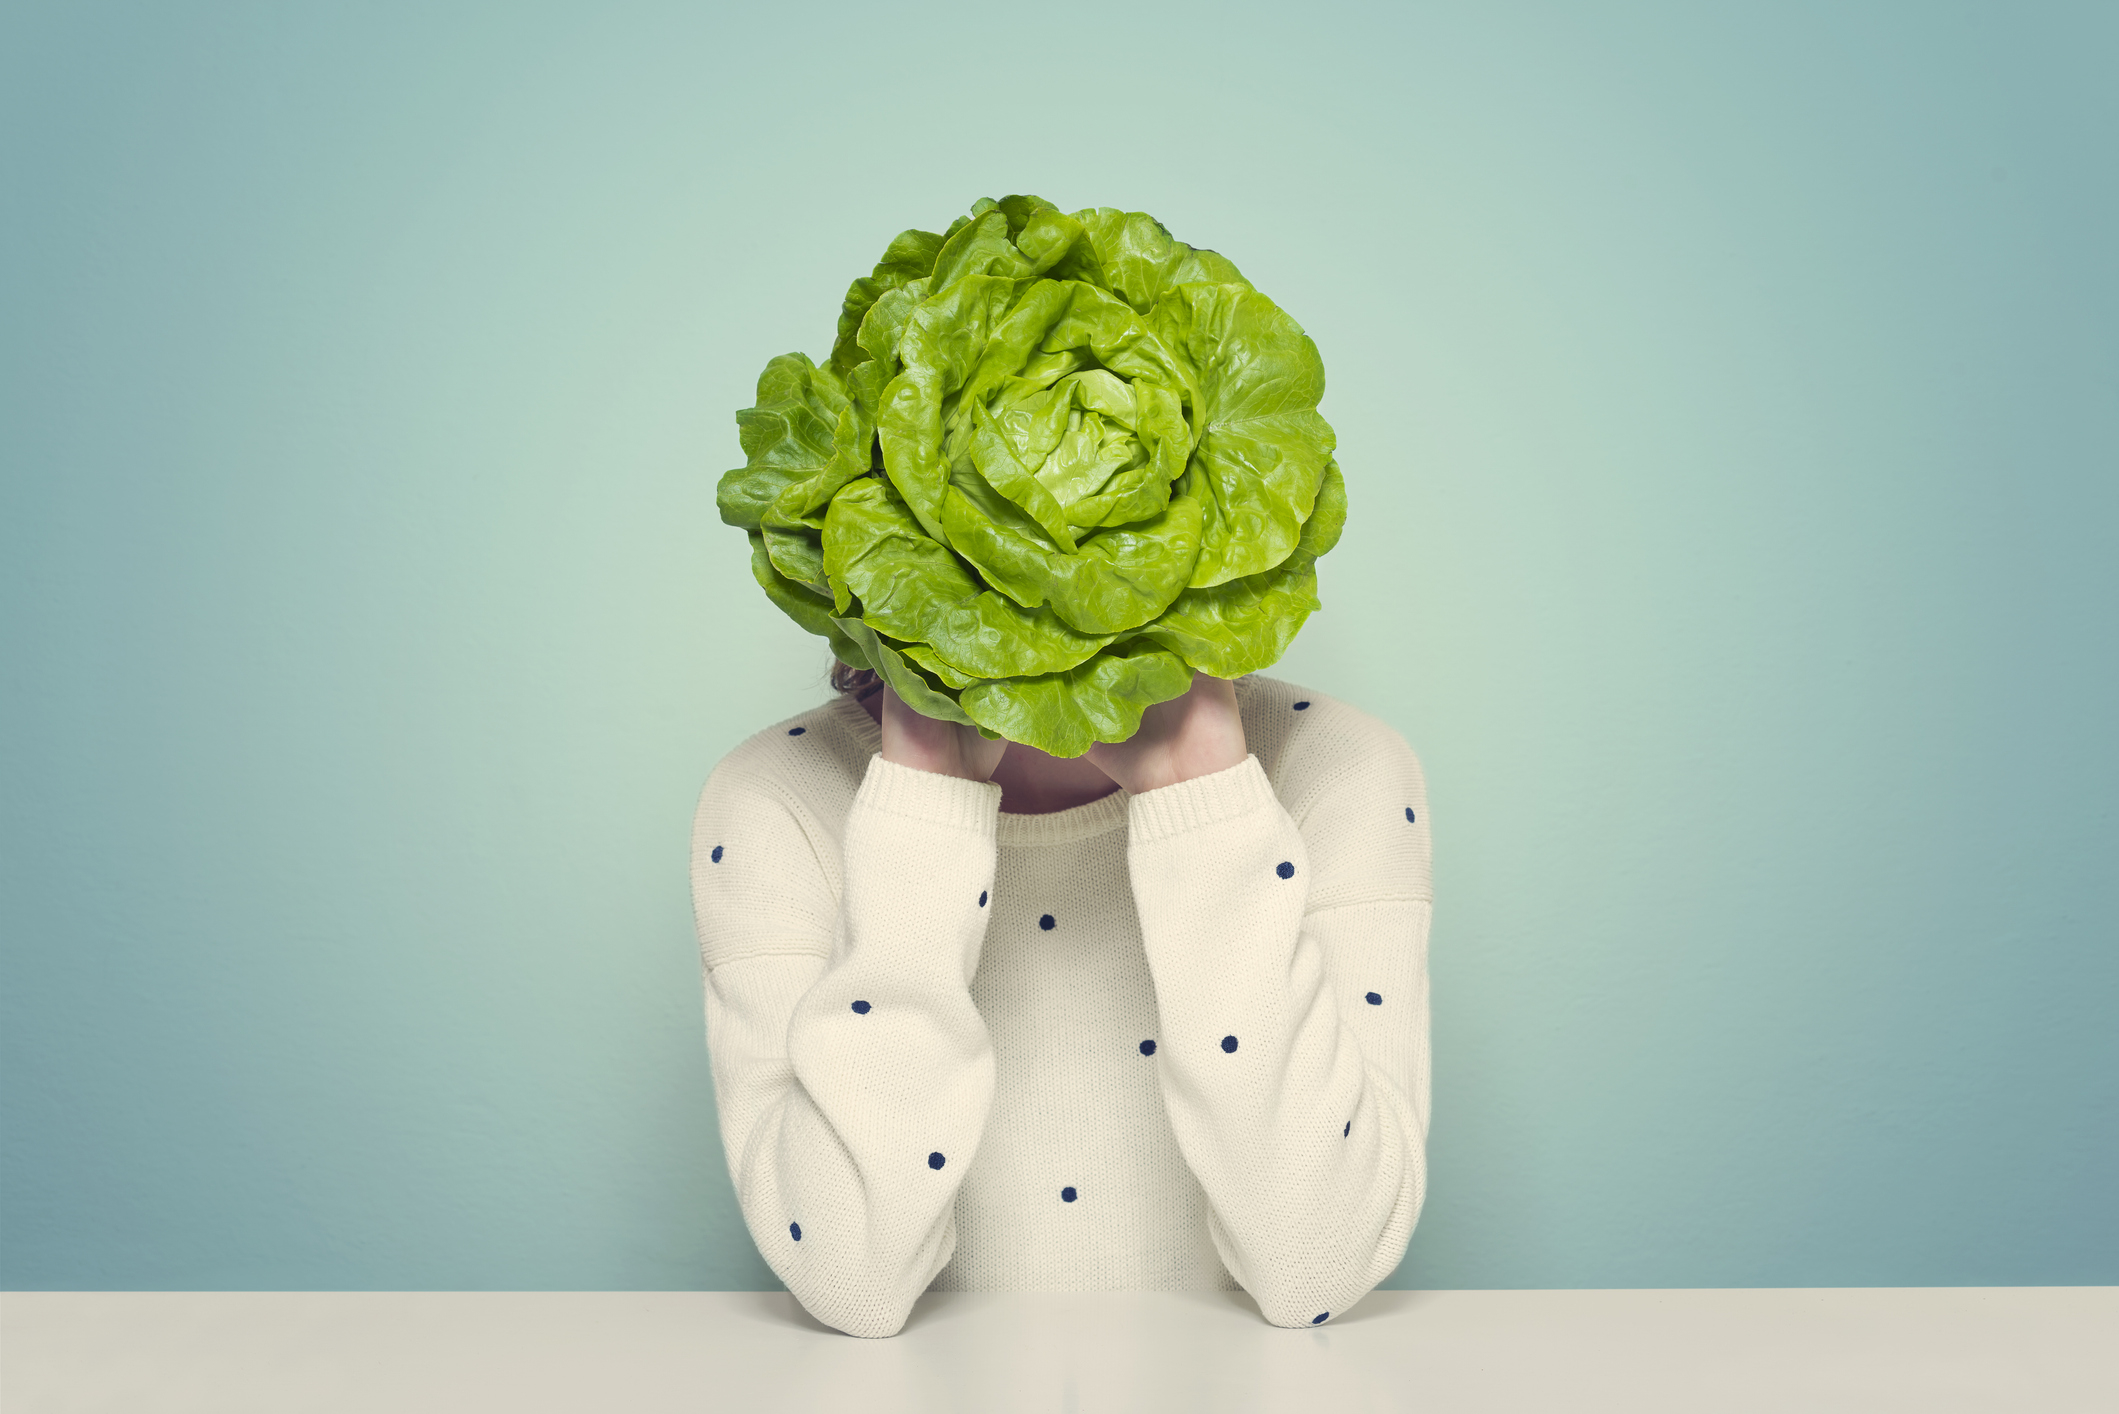 Person with a lettuce head obscuring their face, wearing a white sweater with dot patterns